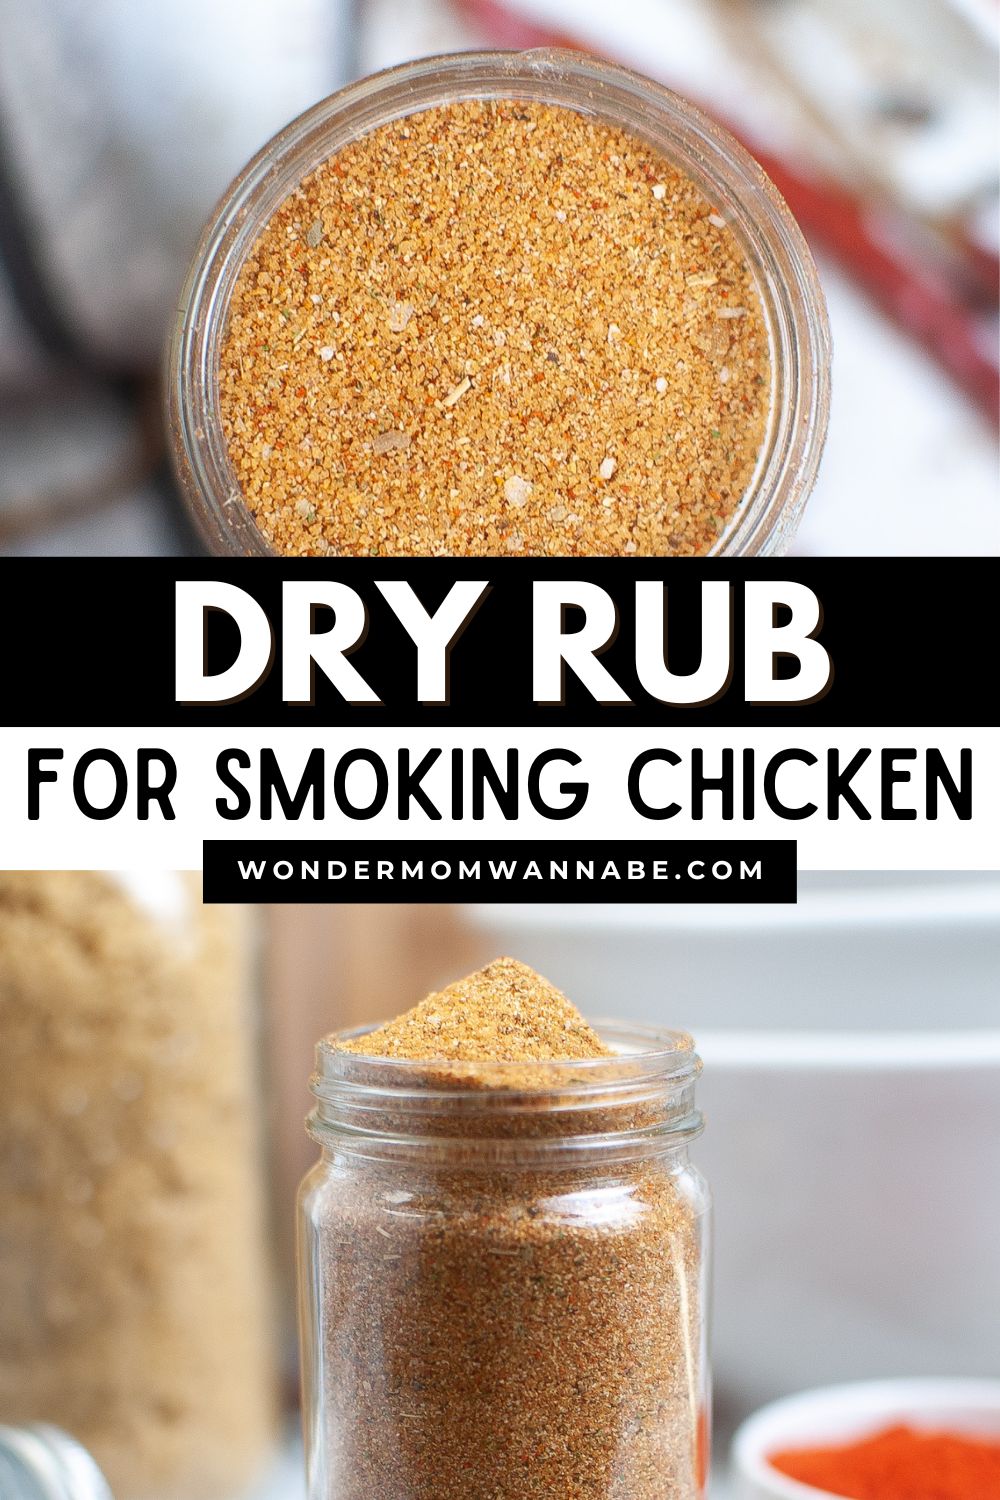 Spice up your chicken with this flavorful dry rub ideal for smoking.